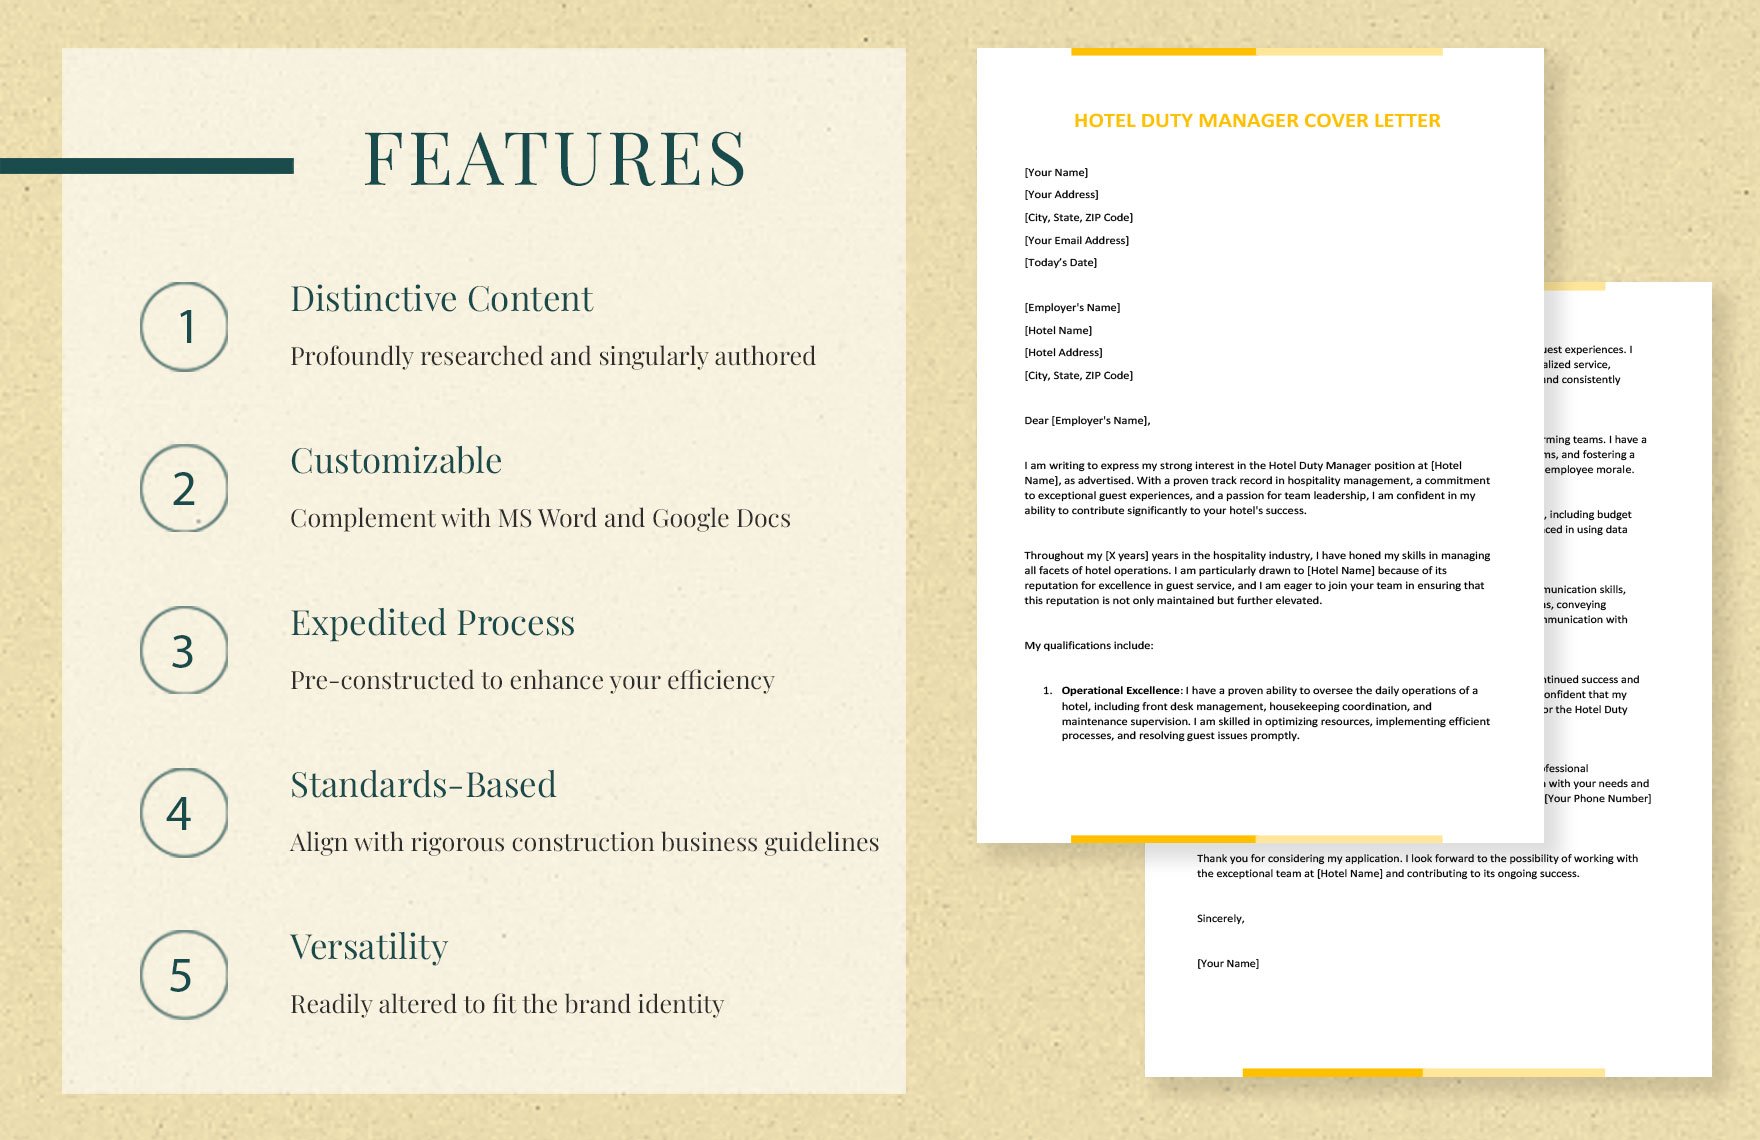 Hotel Duty Manager Cover Letter in Word, Google Docs - Download ...